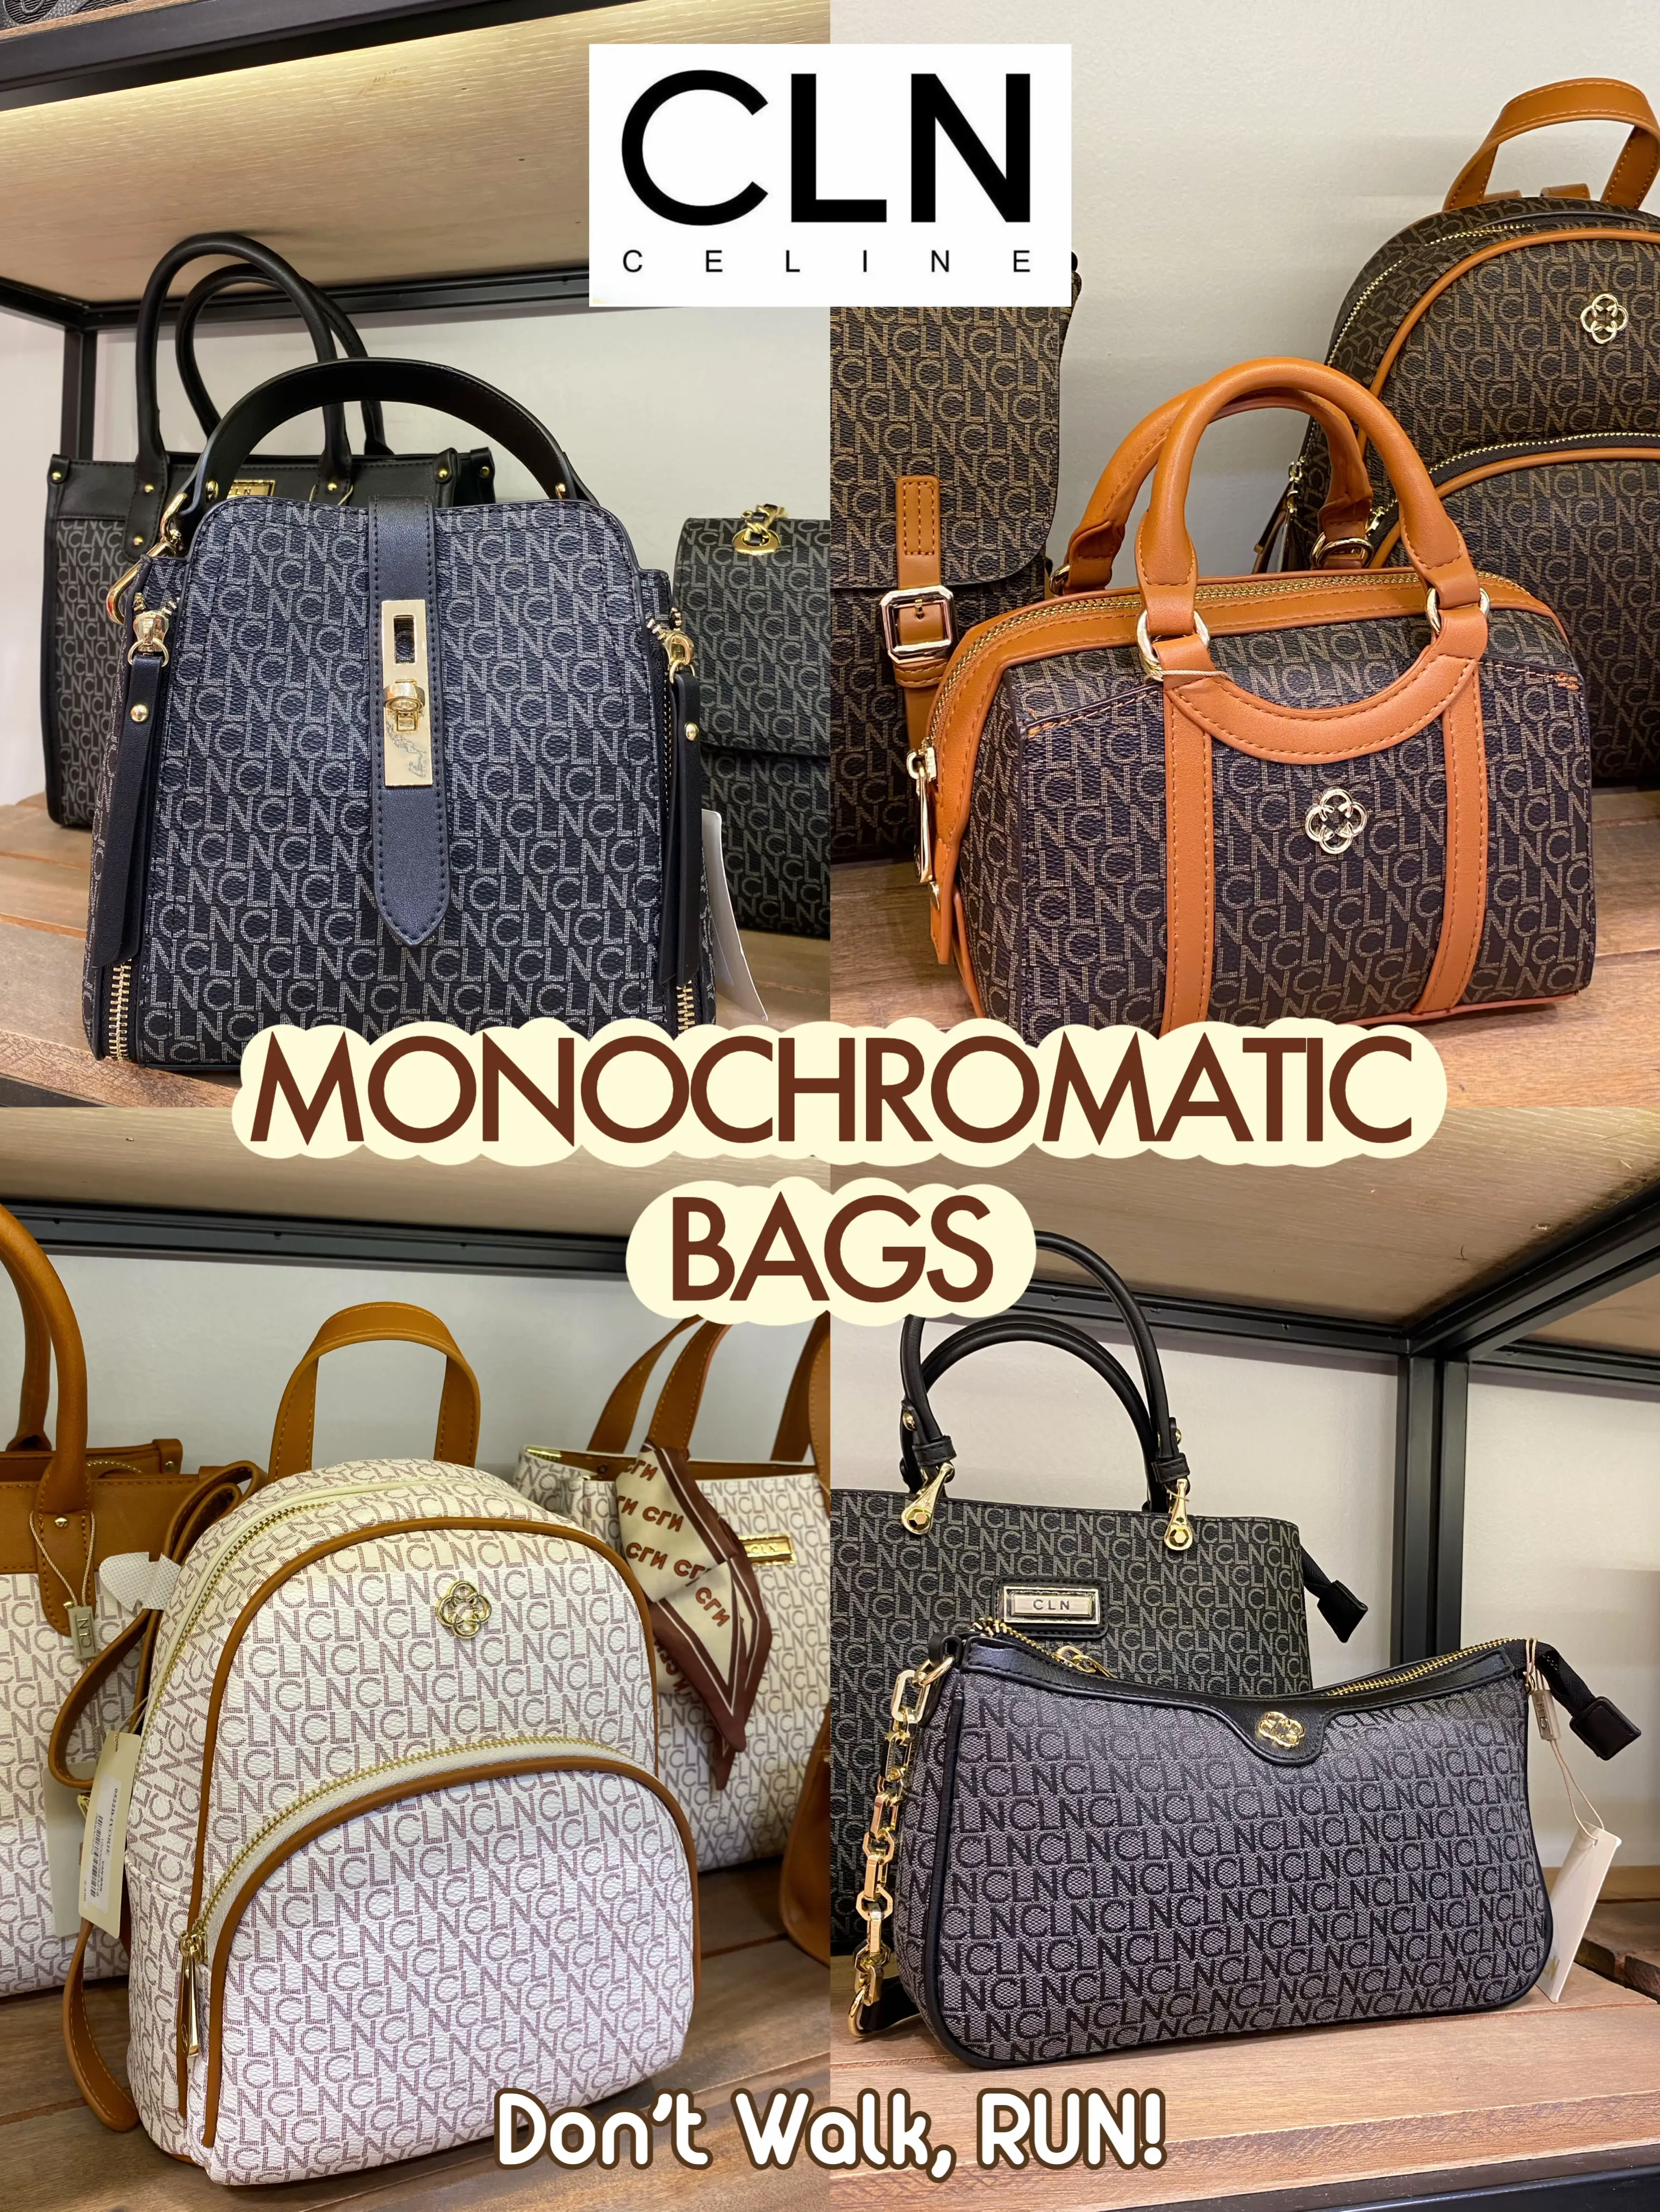 Elegant cln bags For Stylish And Trendy Looks 